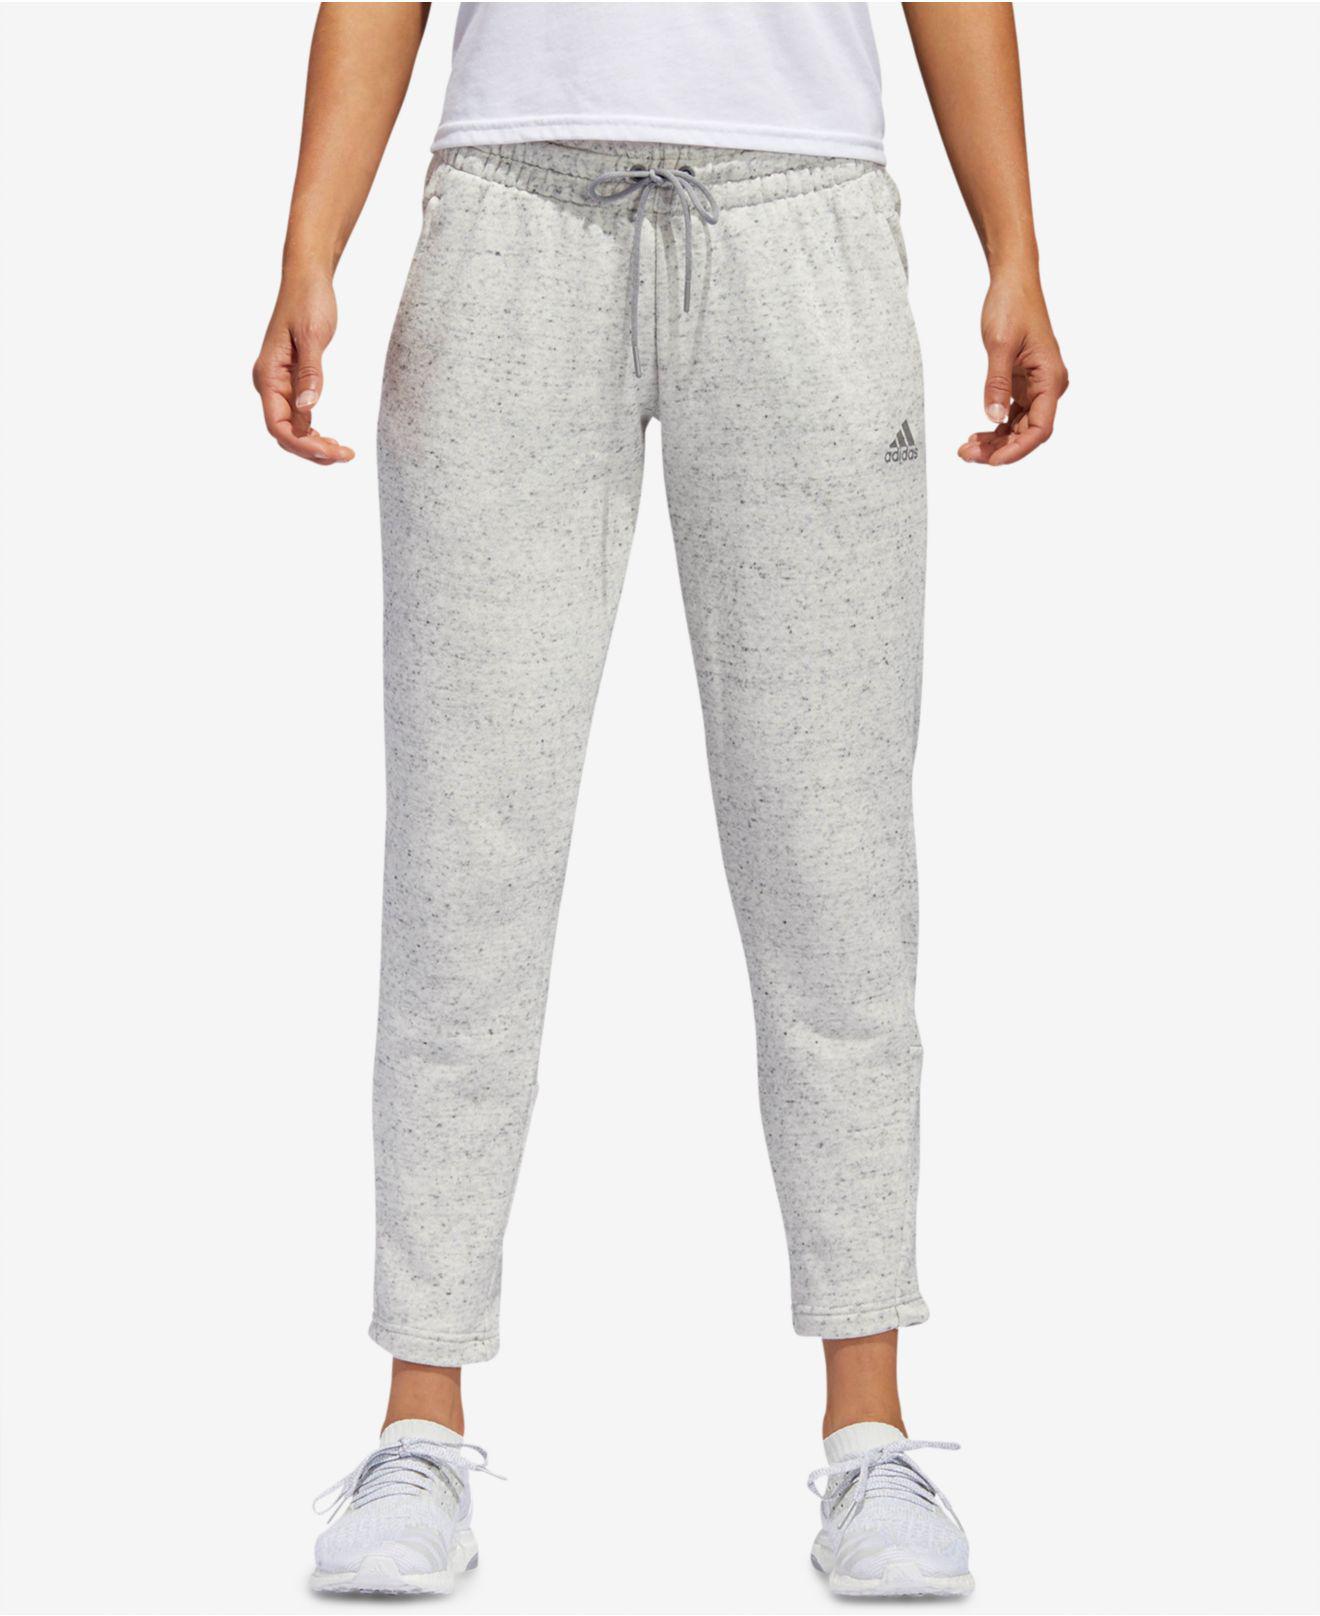 Adidas Cotton French Terry Ankle Pants Flash Sales, SAVE 54%.